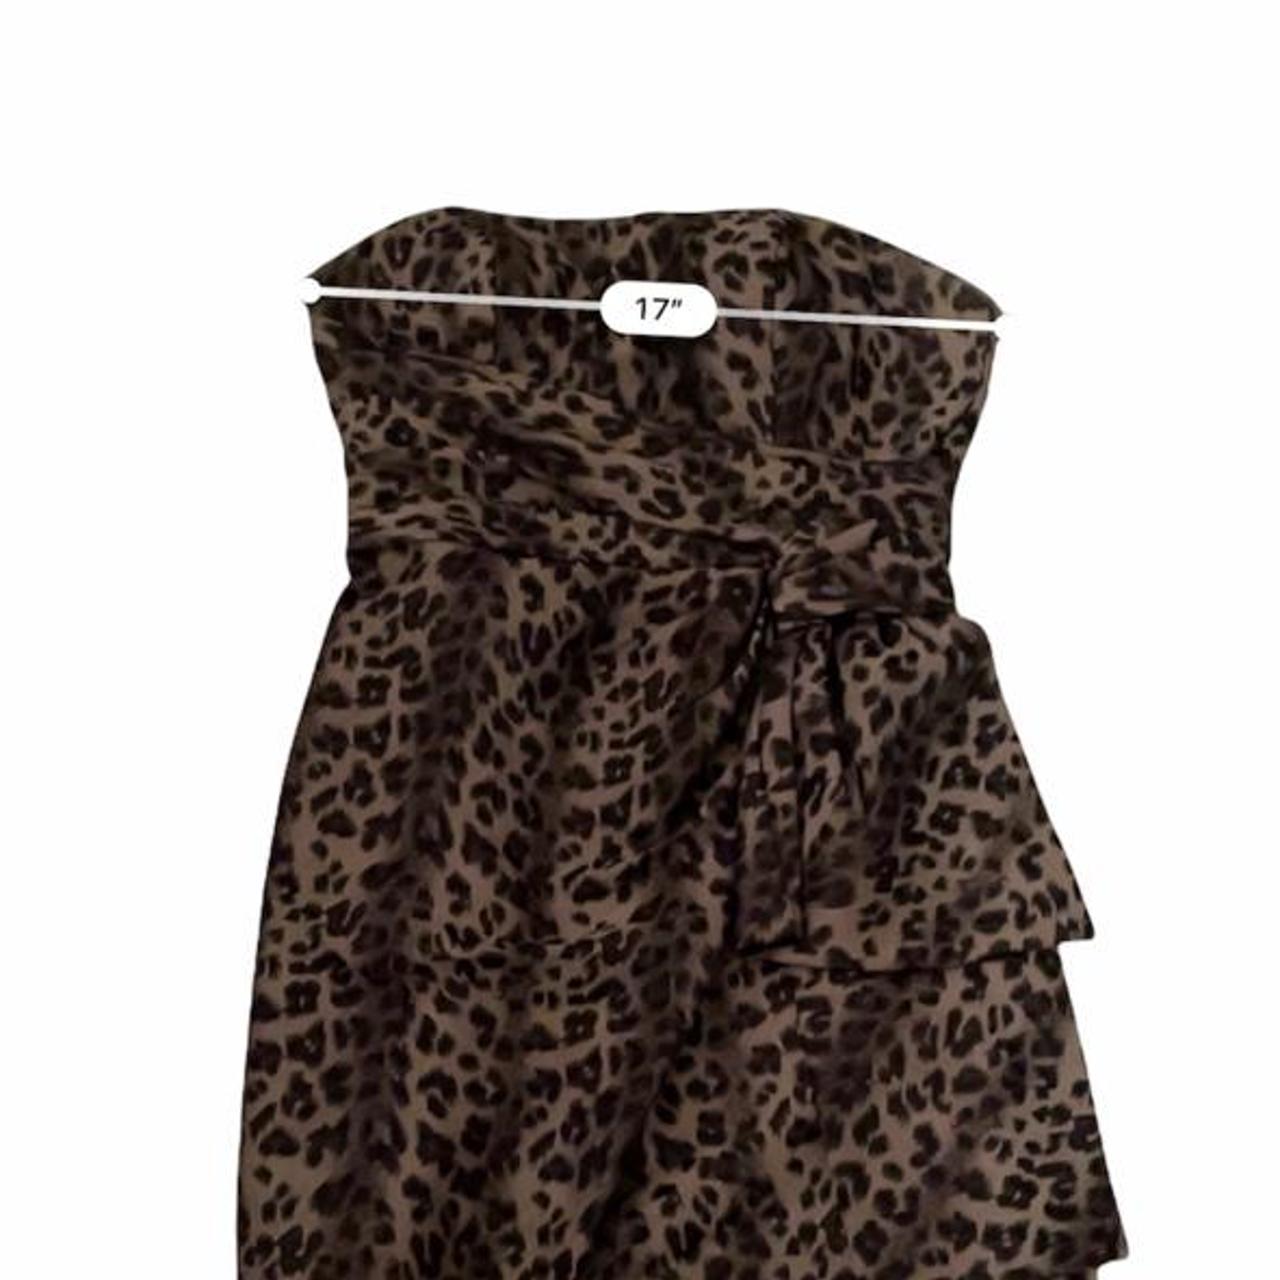 Product Image 3 - Maggy London strapless dress. Good